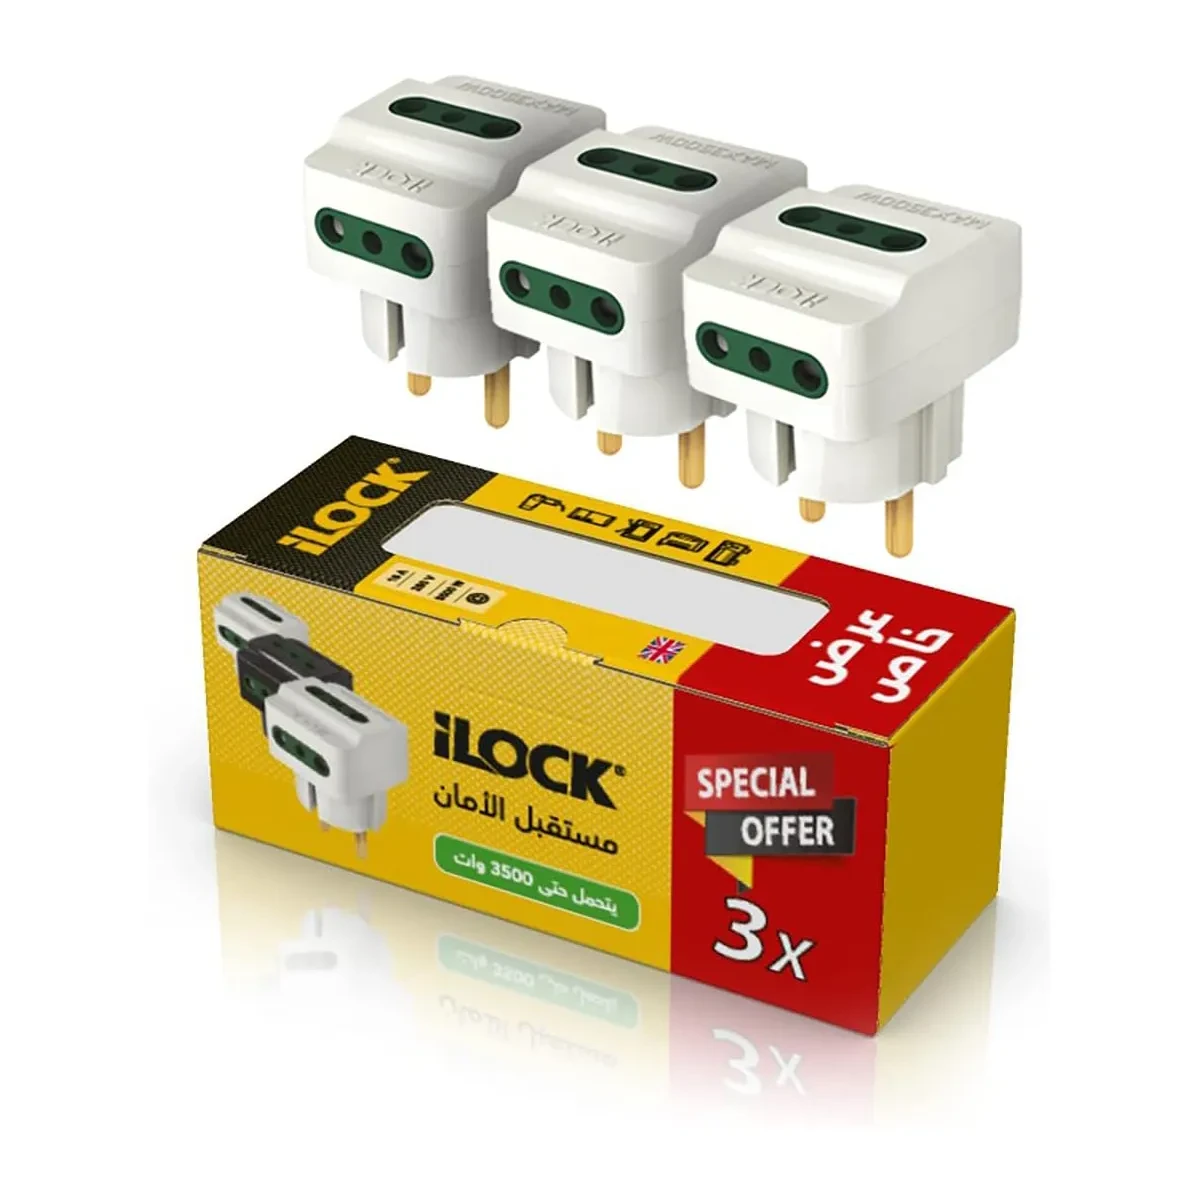 iLock 3-way wall outlet adapter 3500 W (Pack 3) (white) "Offer"